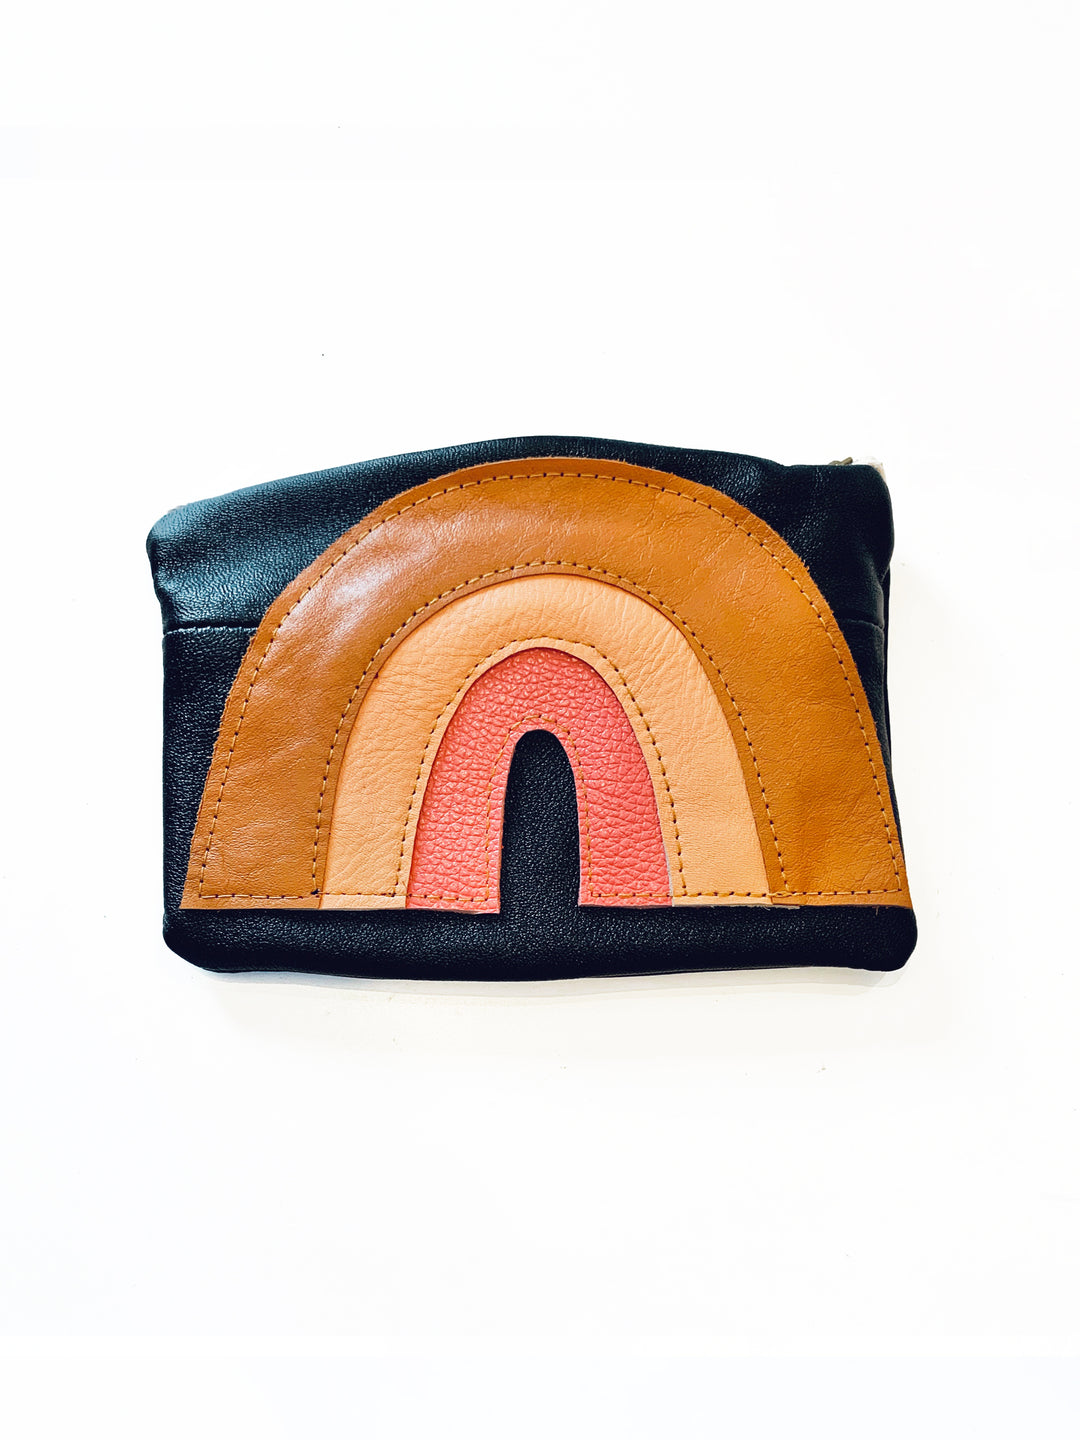 Rainbow Pouch - Kingfisher Road - Online Boutique